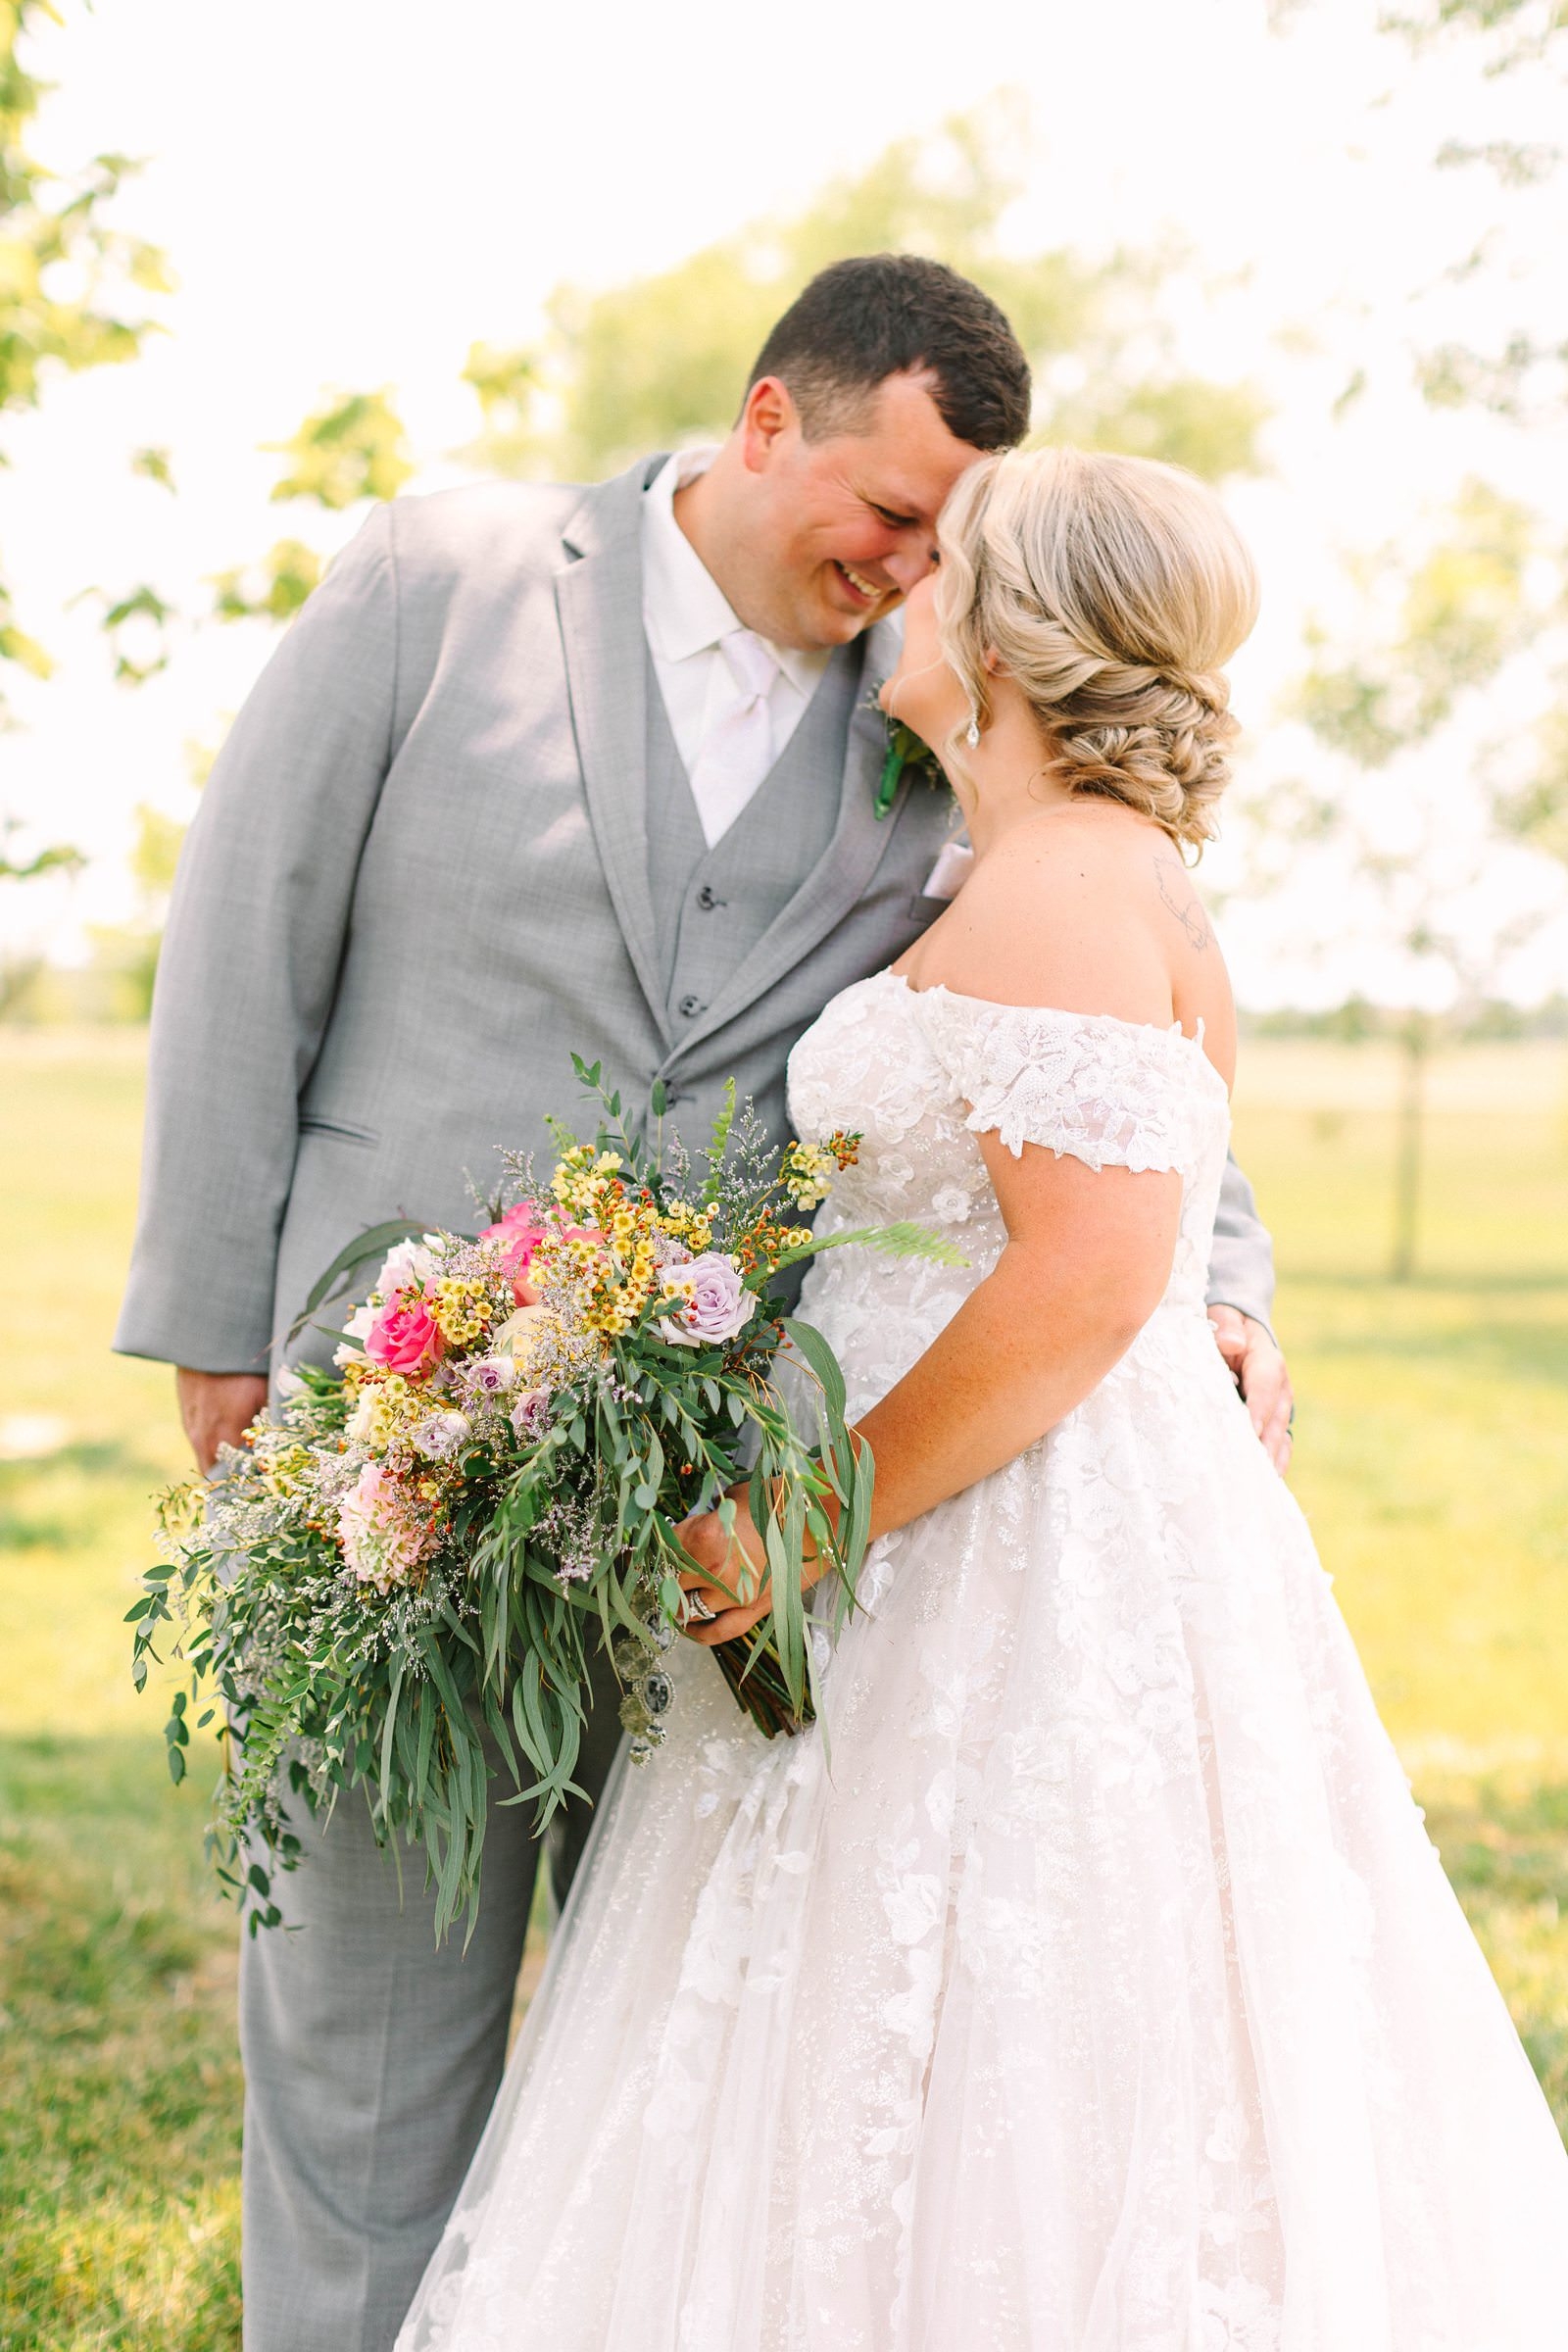 A Sunny Summer Wedding at Friedman Park in Newburgh Indiana | Paige and Dylan | Bret and Brandie Photography073.jpg